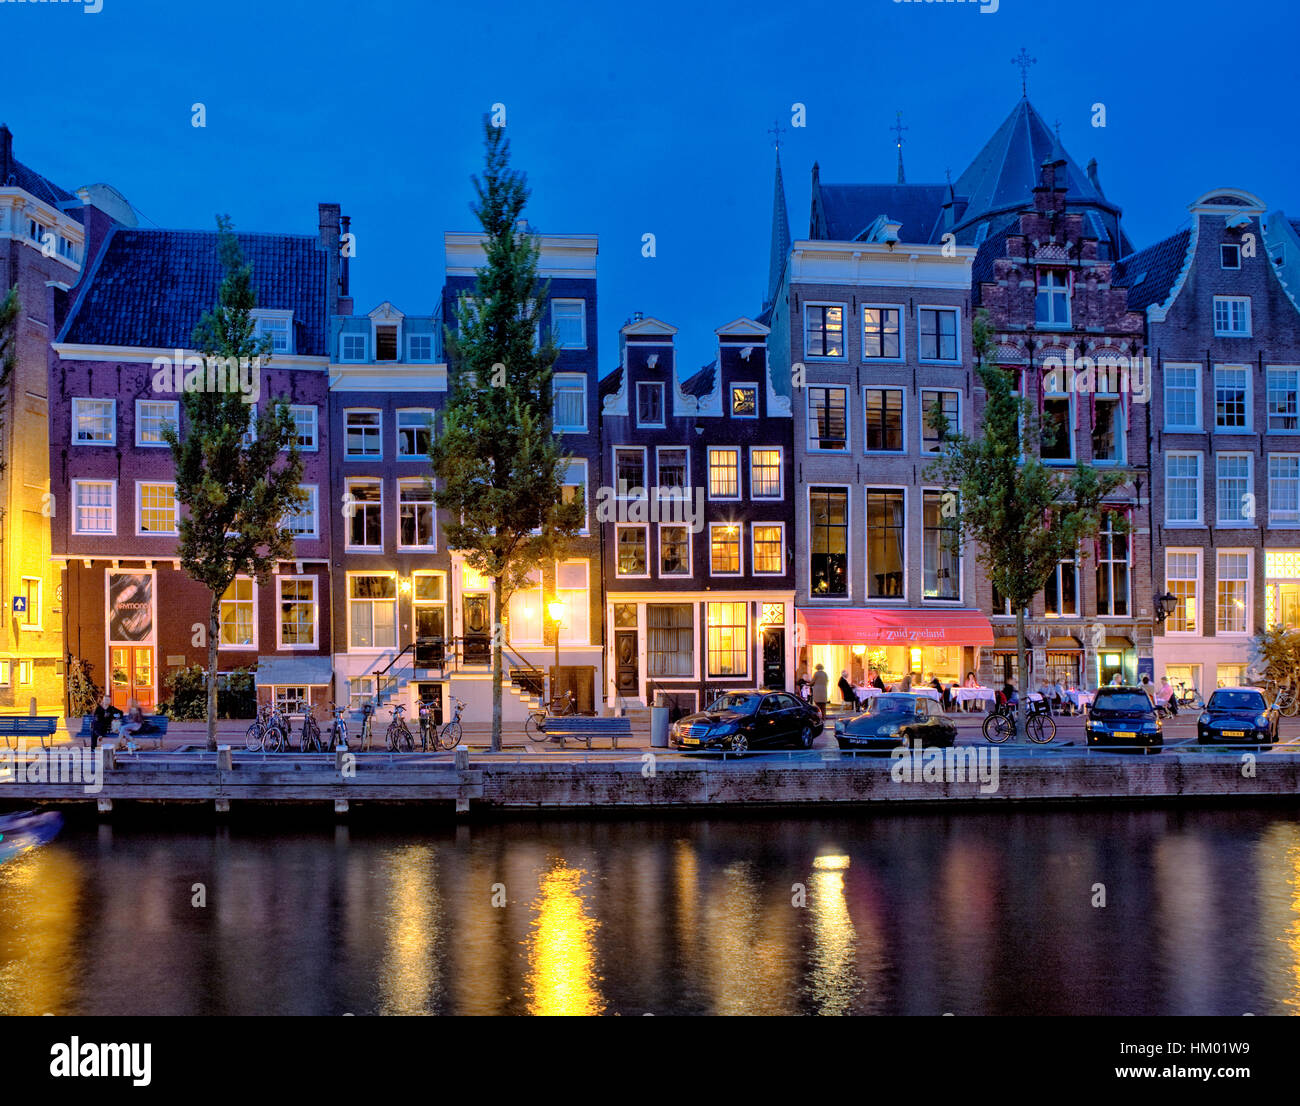 Singel canal at night in Amsterdam Stock Photo